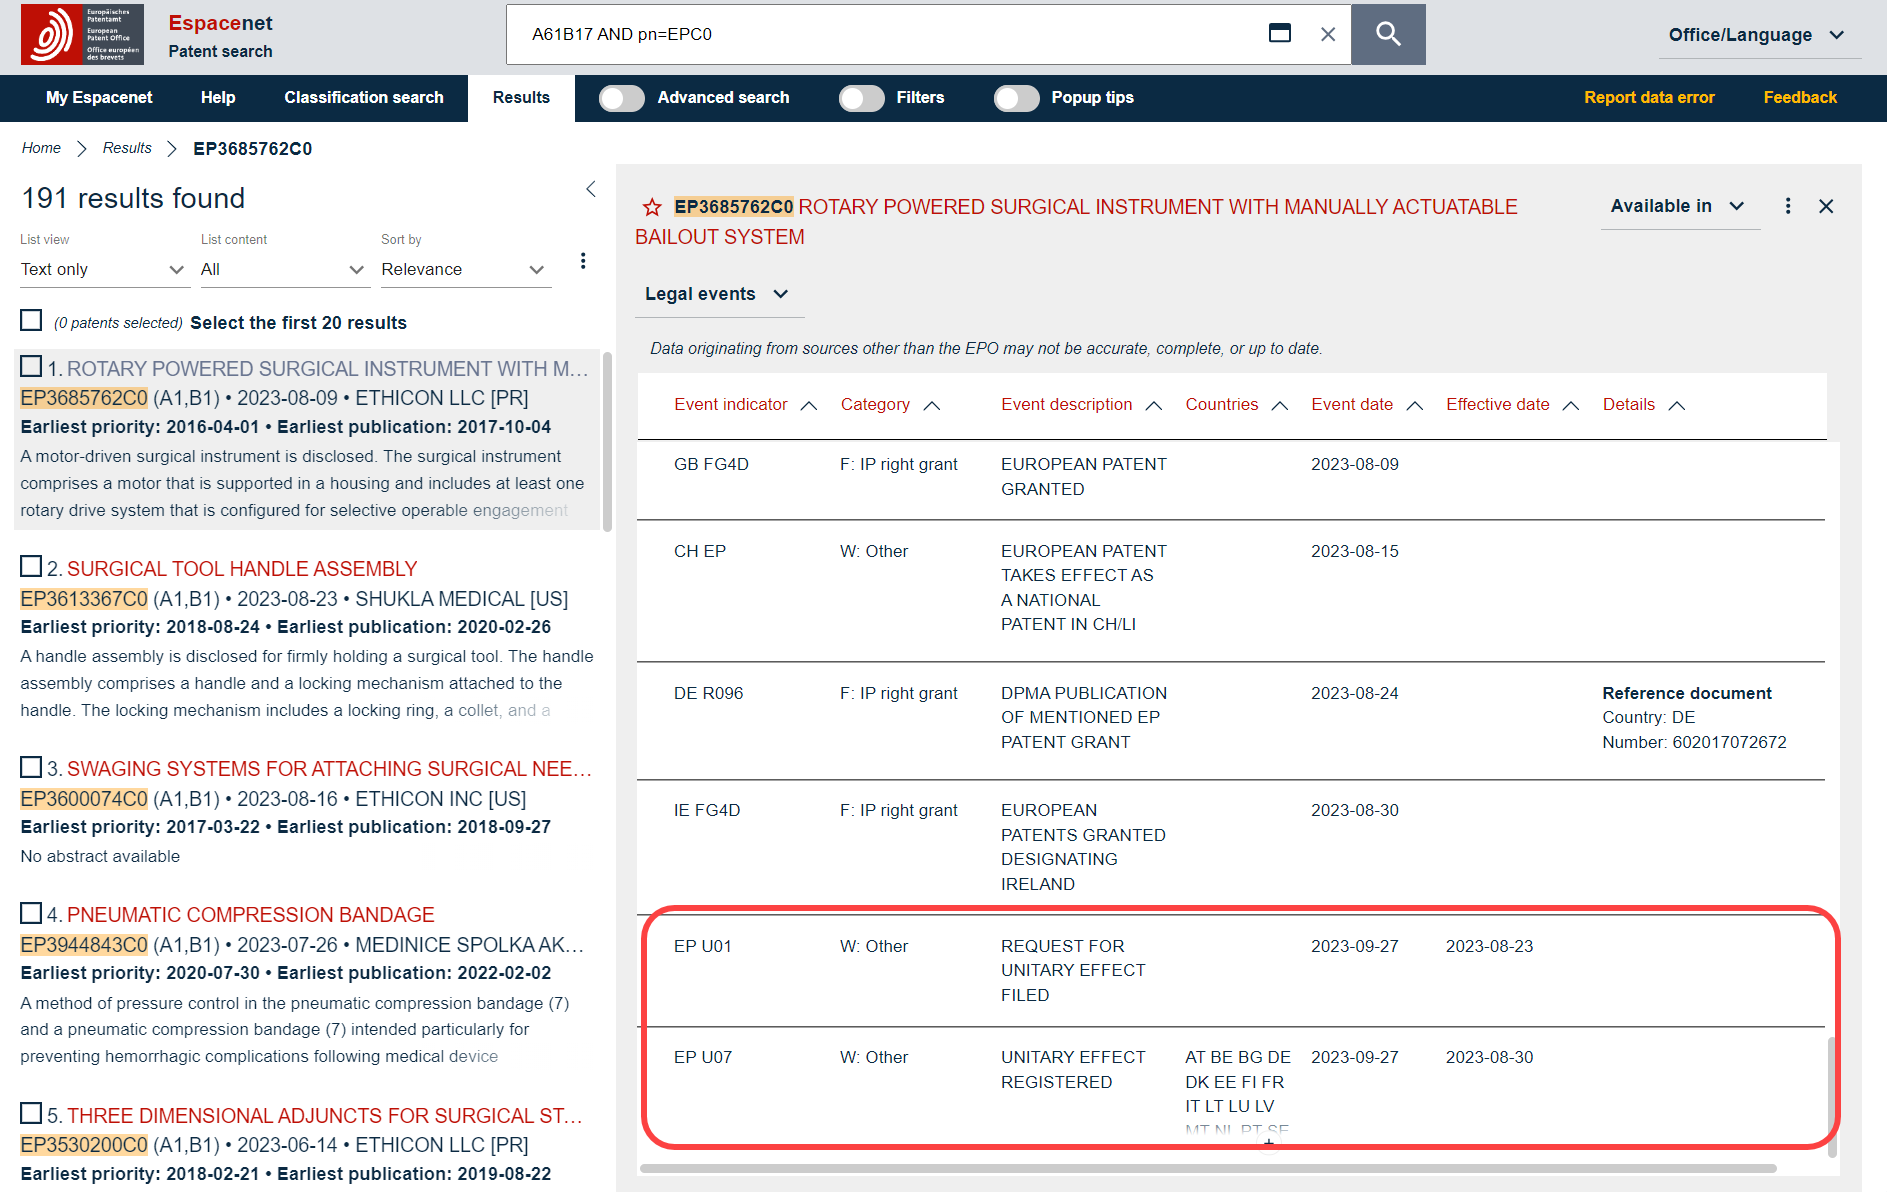 Legal and procedural information related to Unitary Patents is displayed in the Legal events view of Espacenet.